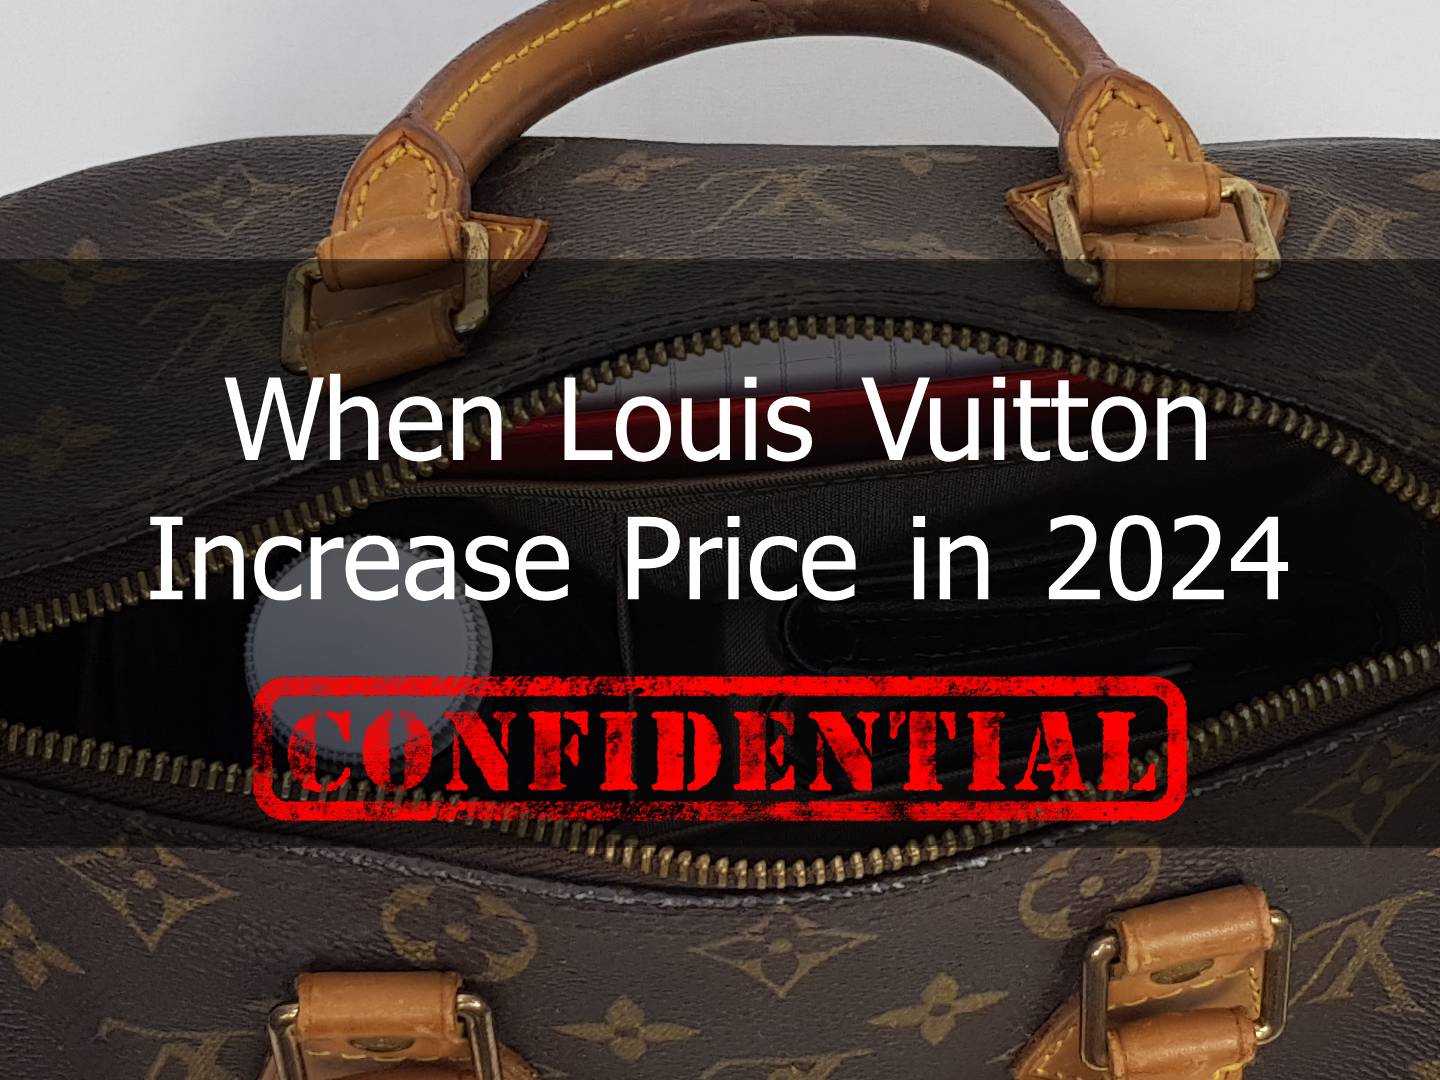 The Cheapest Country to buy Louis Vuitton in 2024